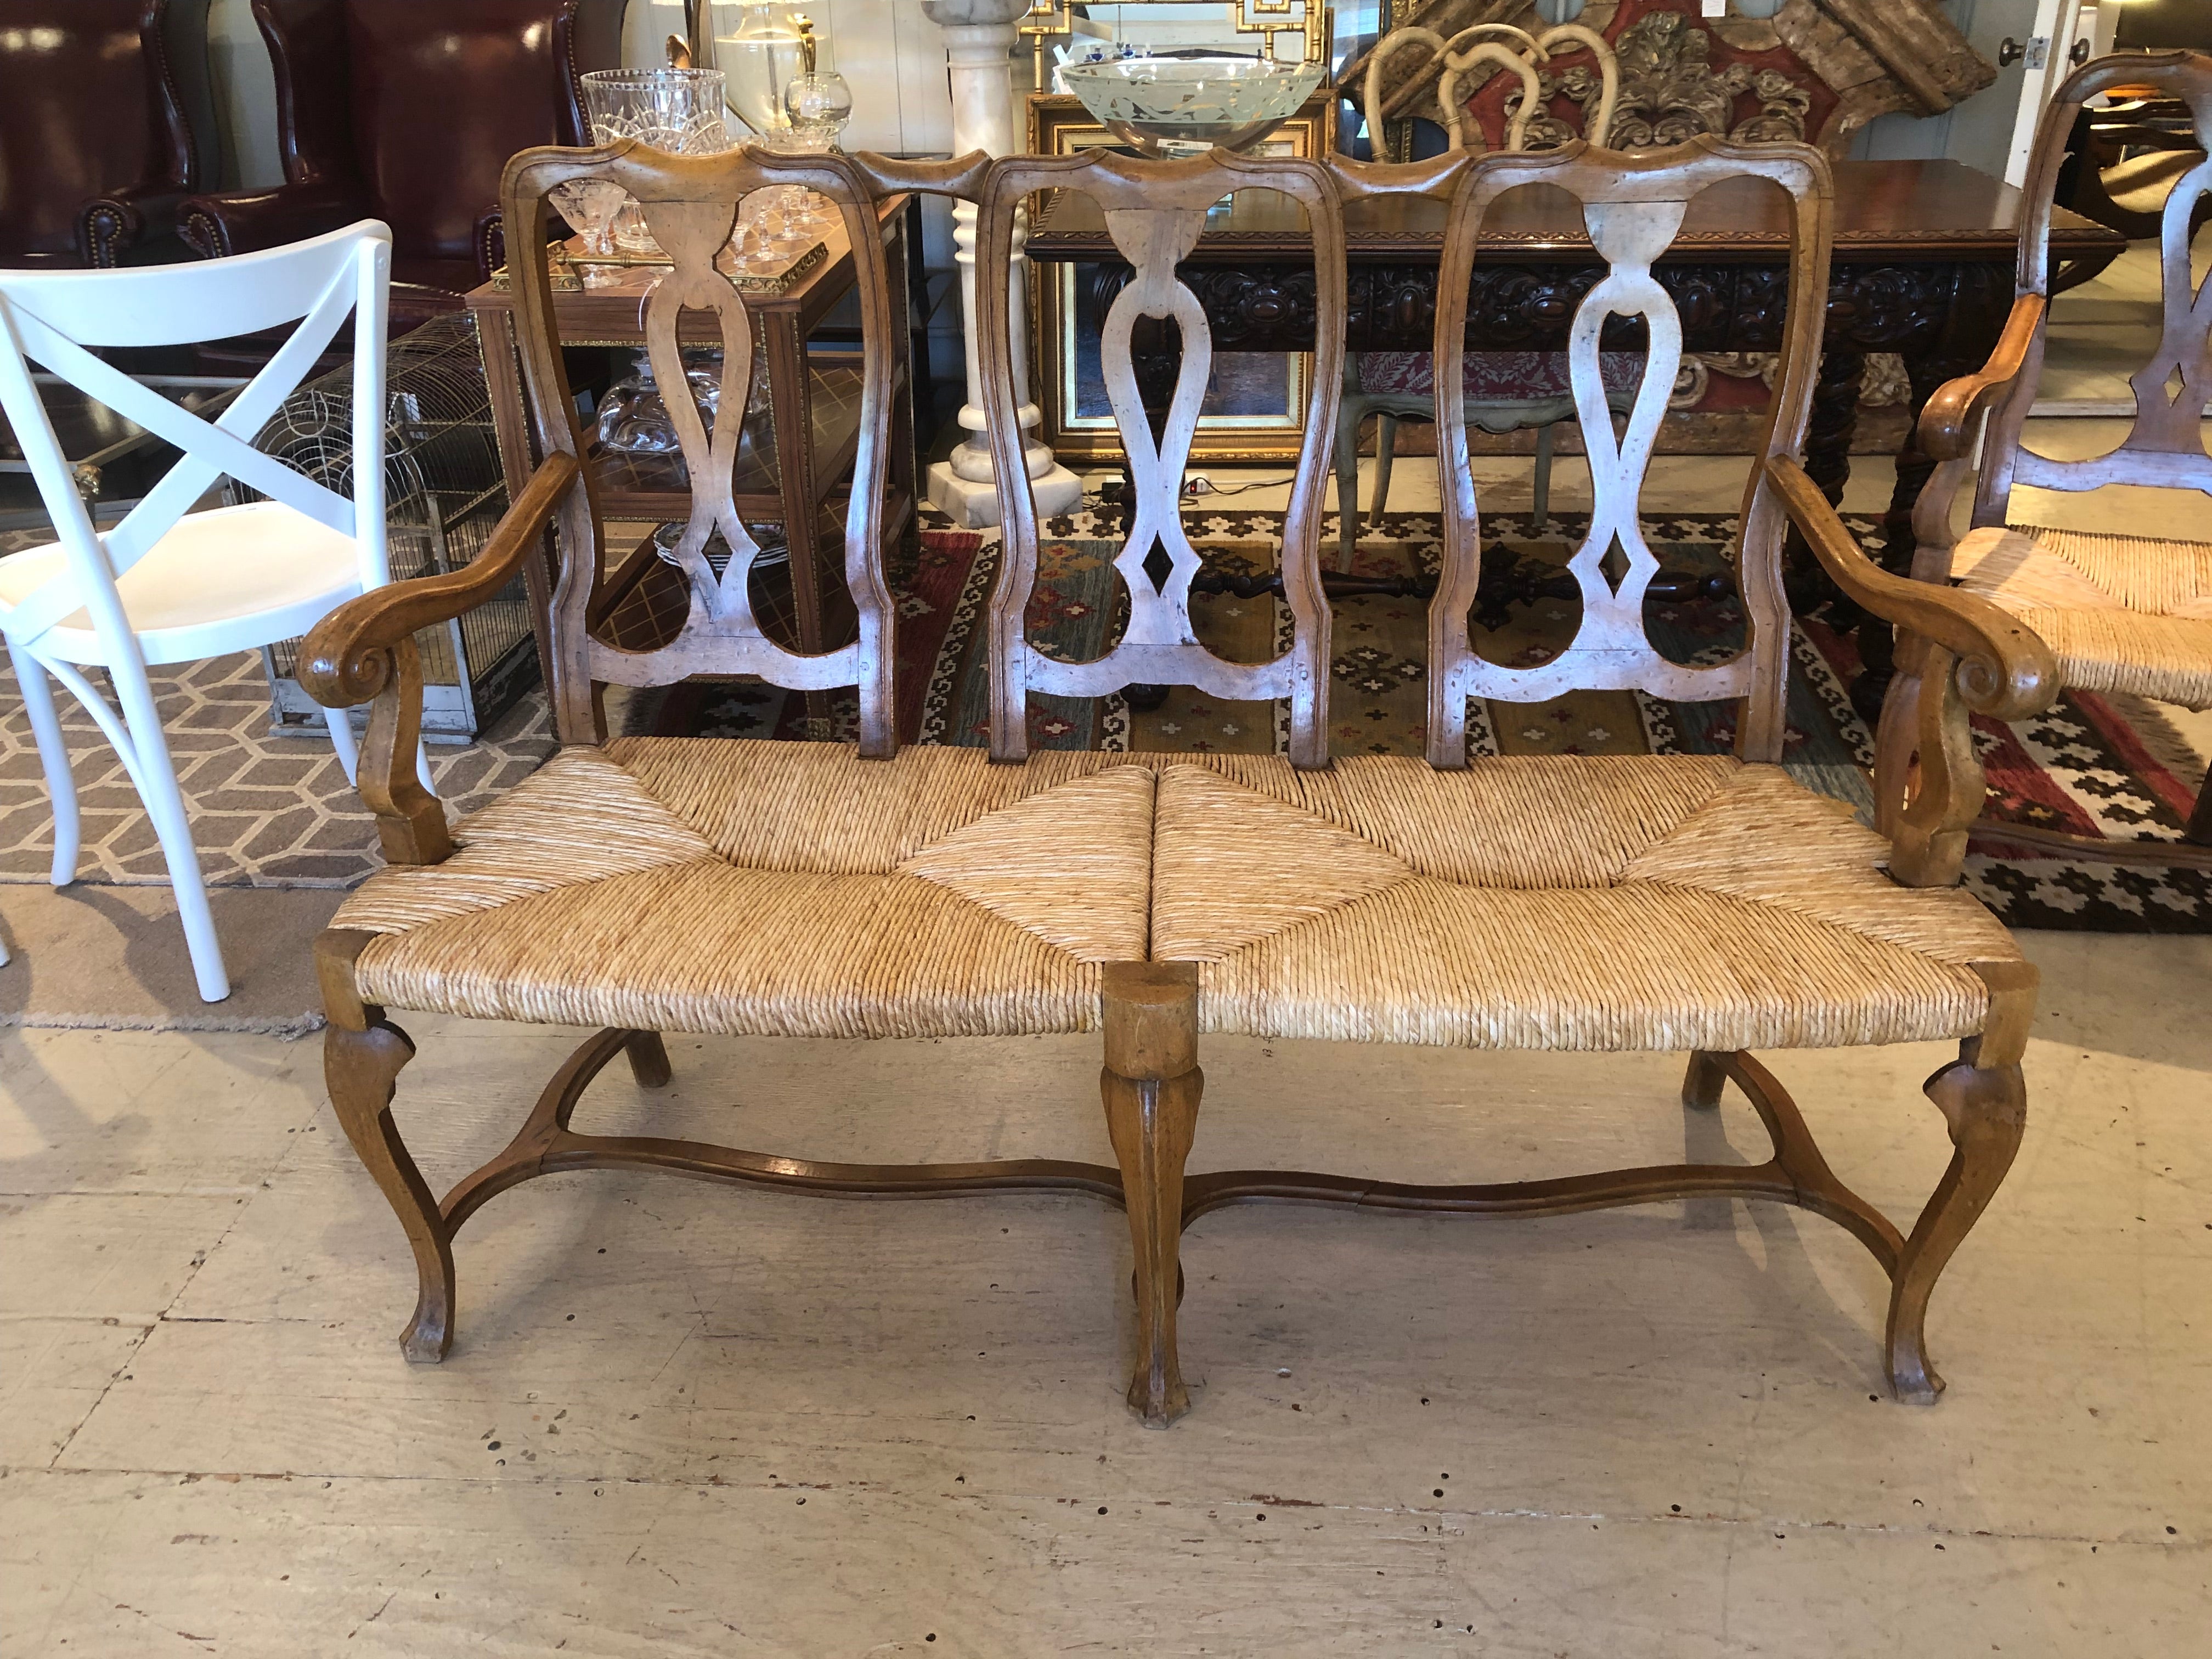 Large super charming vintage chestnut bench having scroll arms and 3 beautiful carved wood sections of the back. Seat is handsome original rush in great shape. Cabriole legs and stretcher underneath finish the French Provincial look with